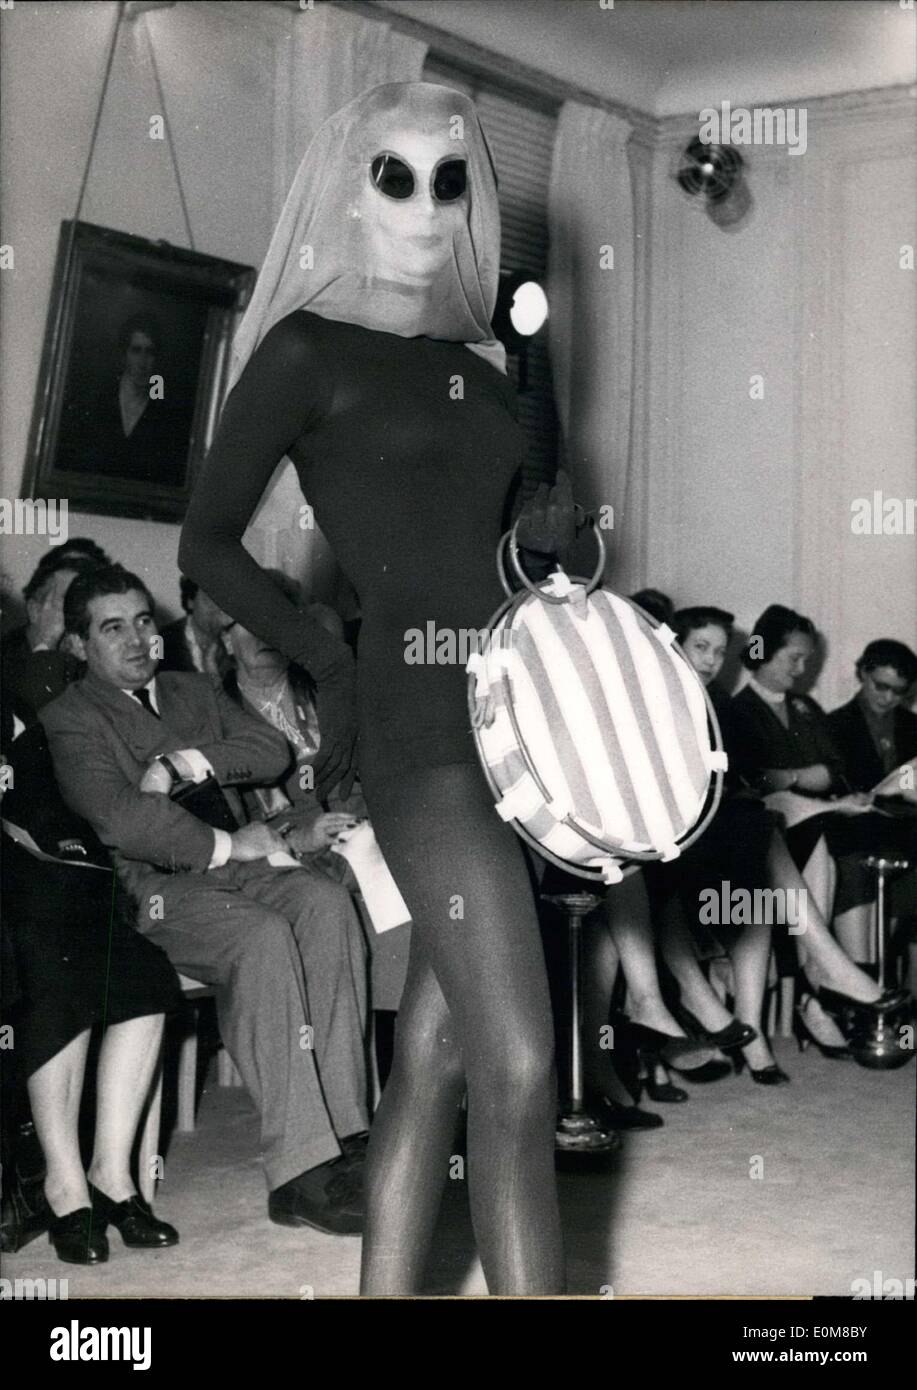 Jan. 28, 1954 - This young girl wearing a black body suit is not trying to imitate a ghost, but presenting a novelty created by Stock Photo